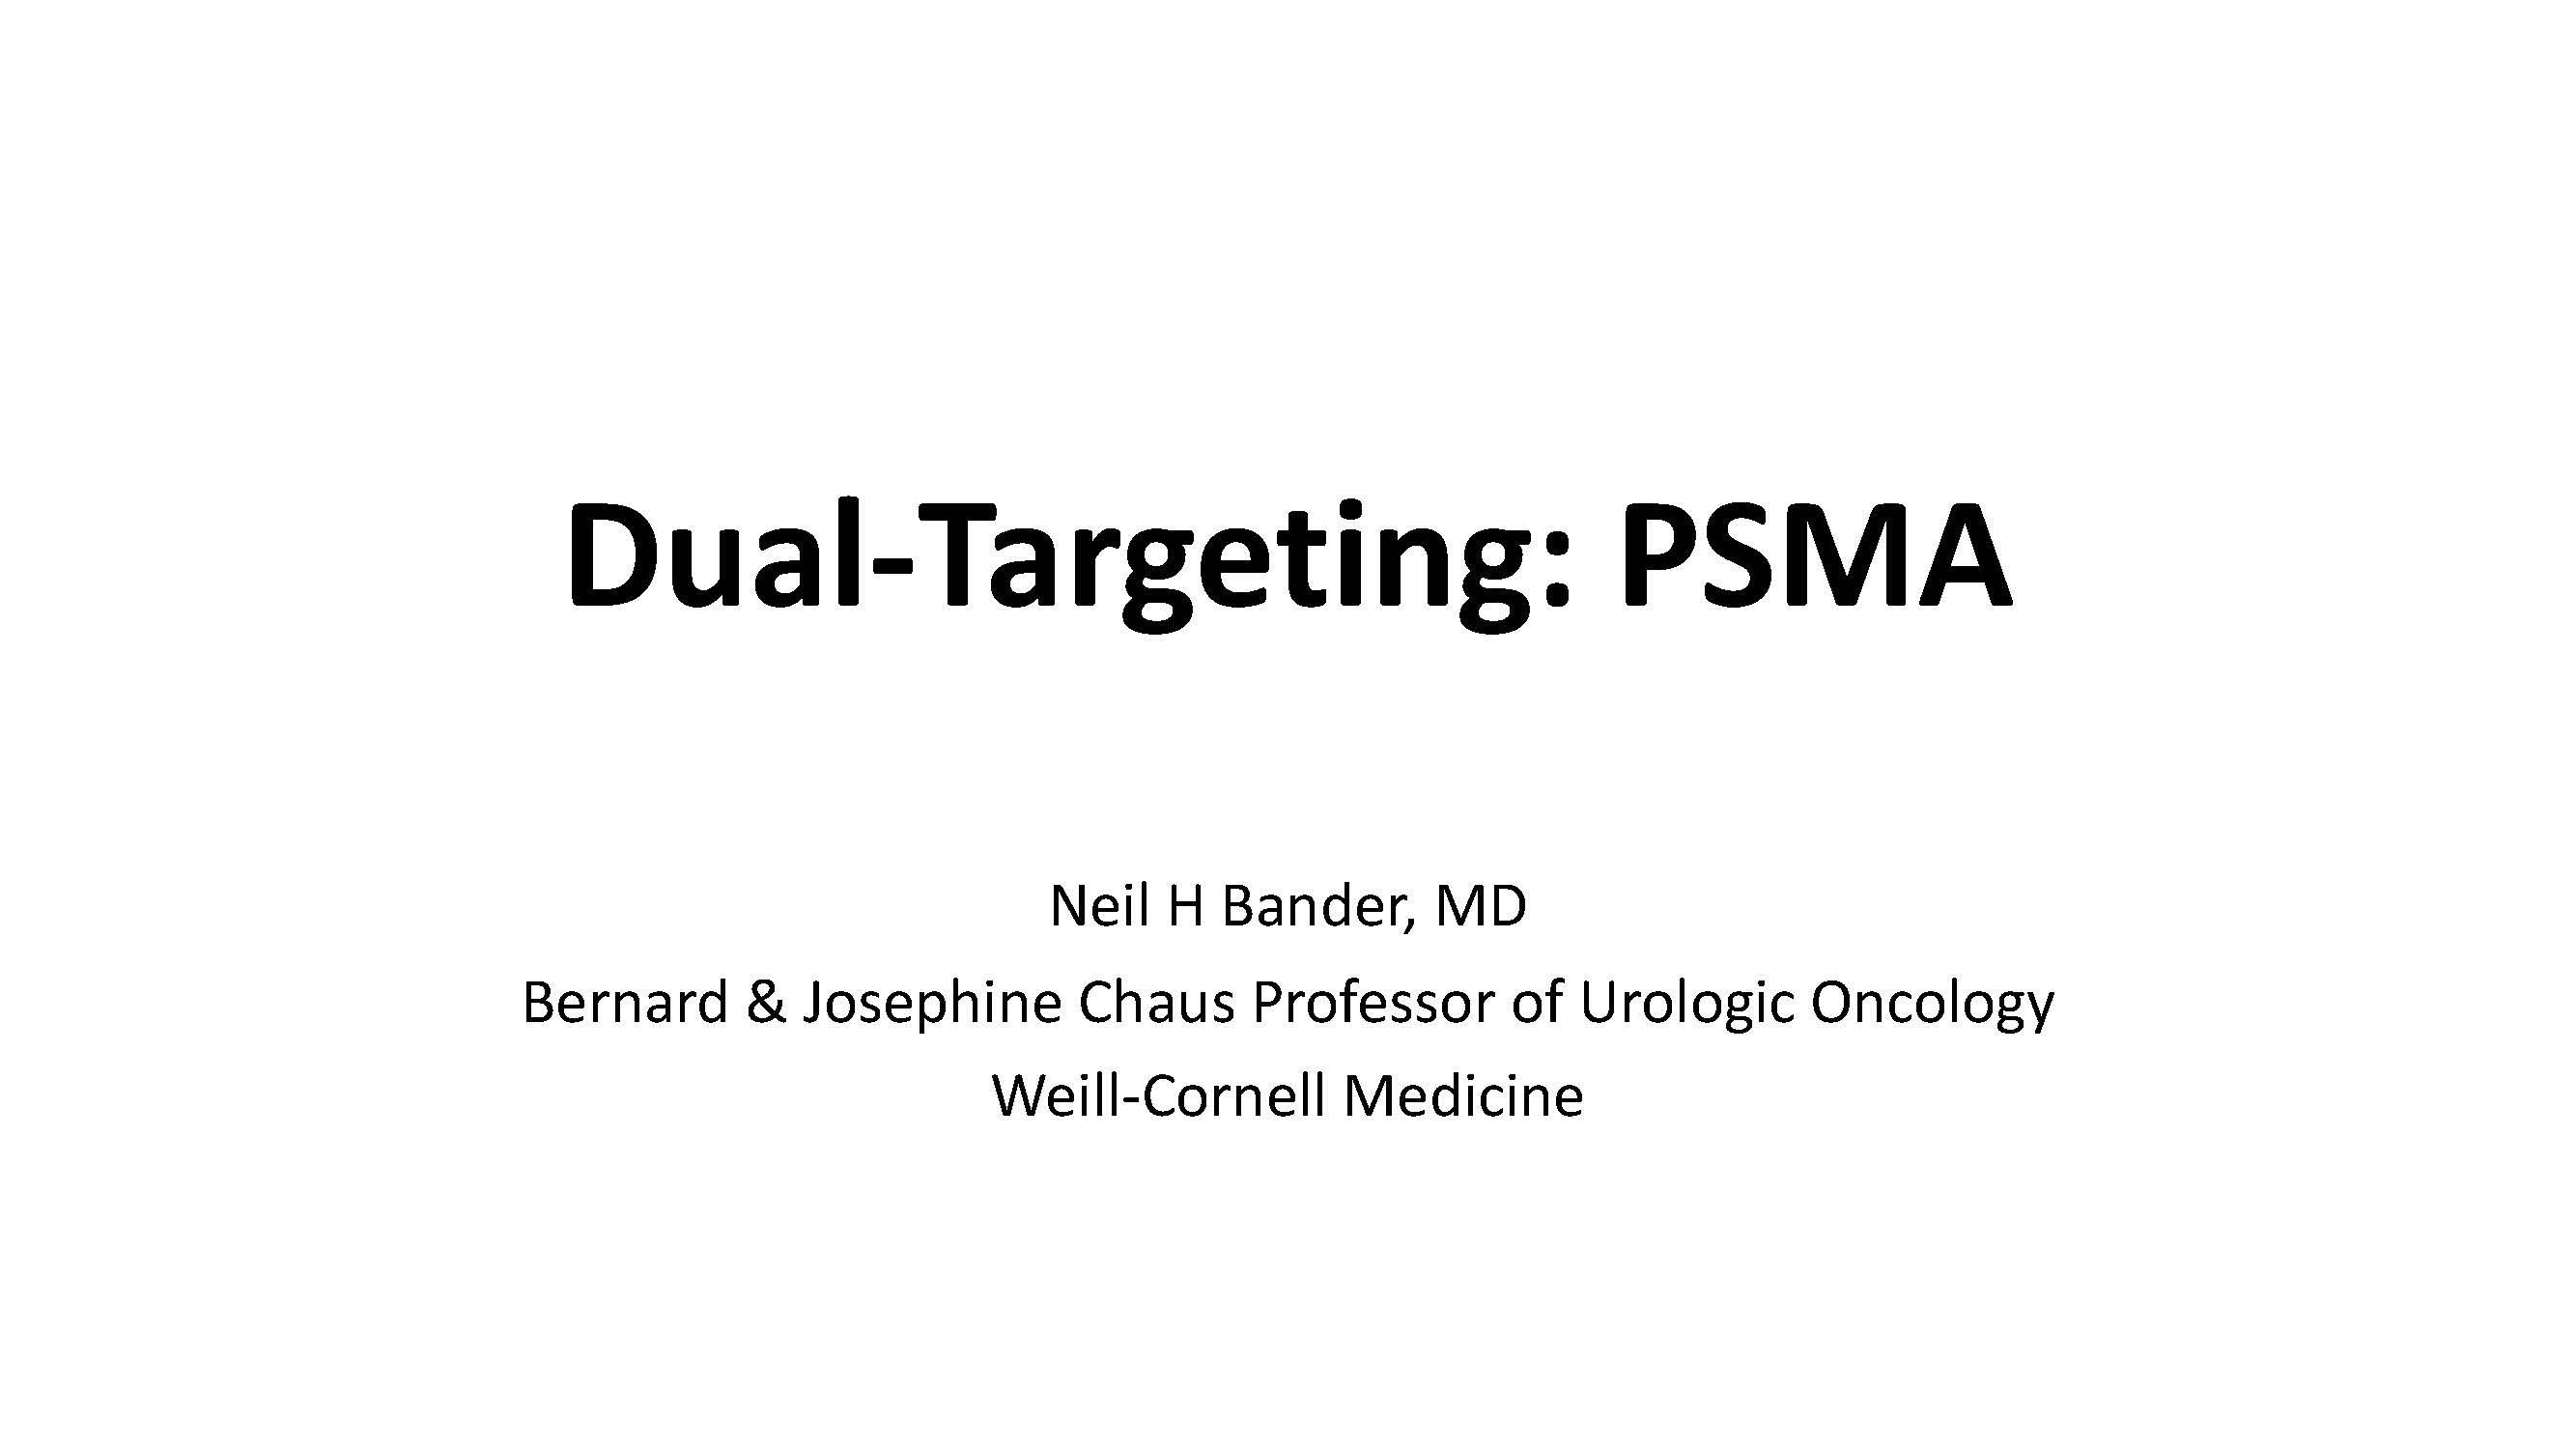 Dual -Targeting: PSMA by Dr. Neil Bander, Weill Cornell Medicine